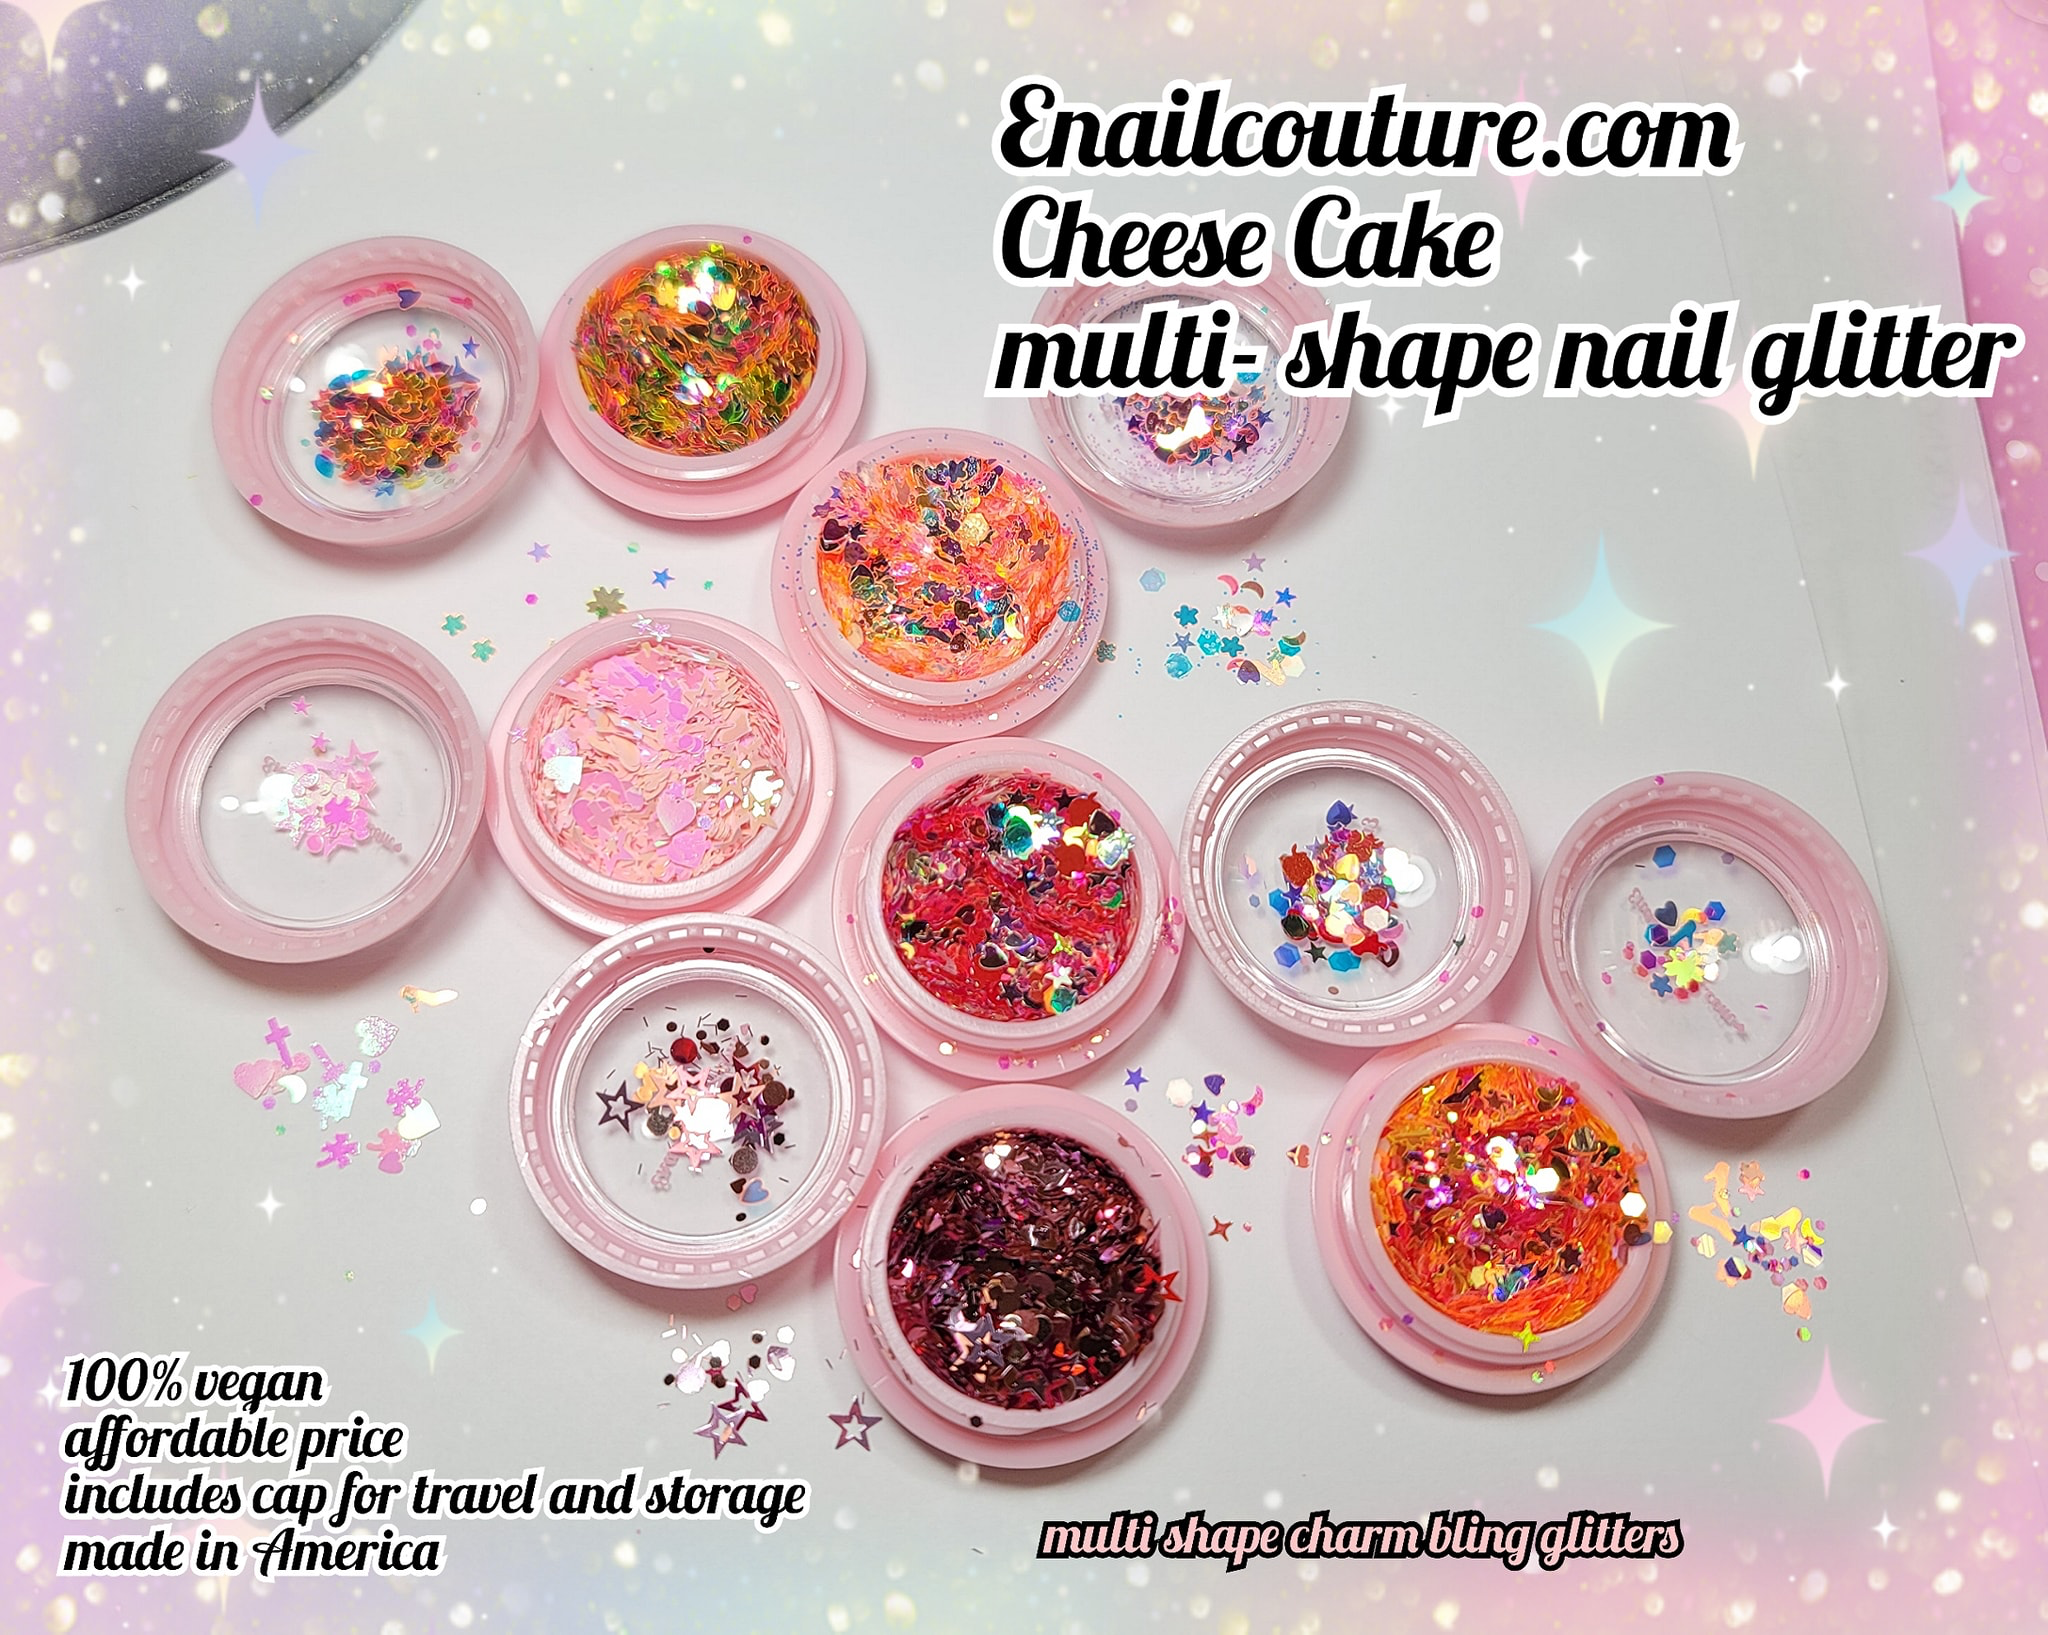 Cheese Cake Glitter Set (Set of 6 Holographic Nail Glitter Mermaid Powder Flakes Shiny Charms Hexagon Nail Art Pigment Dust Decoration Manicure)